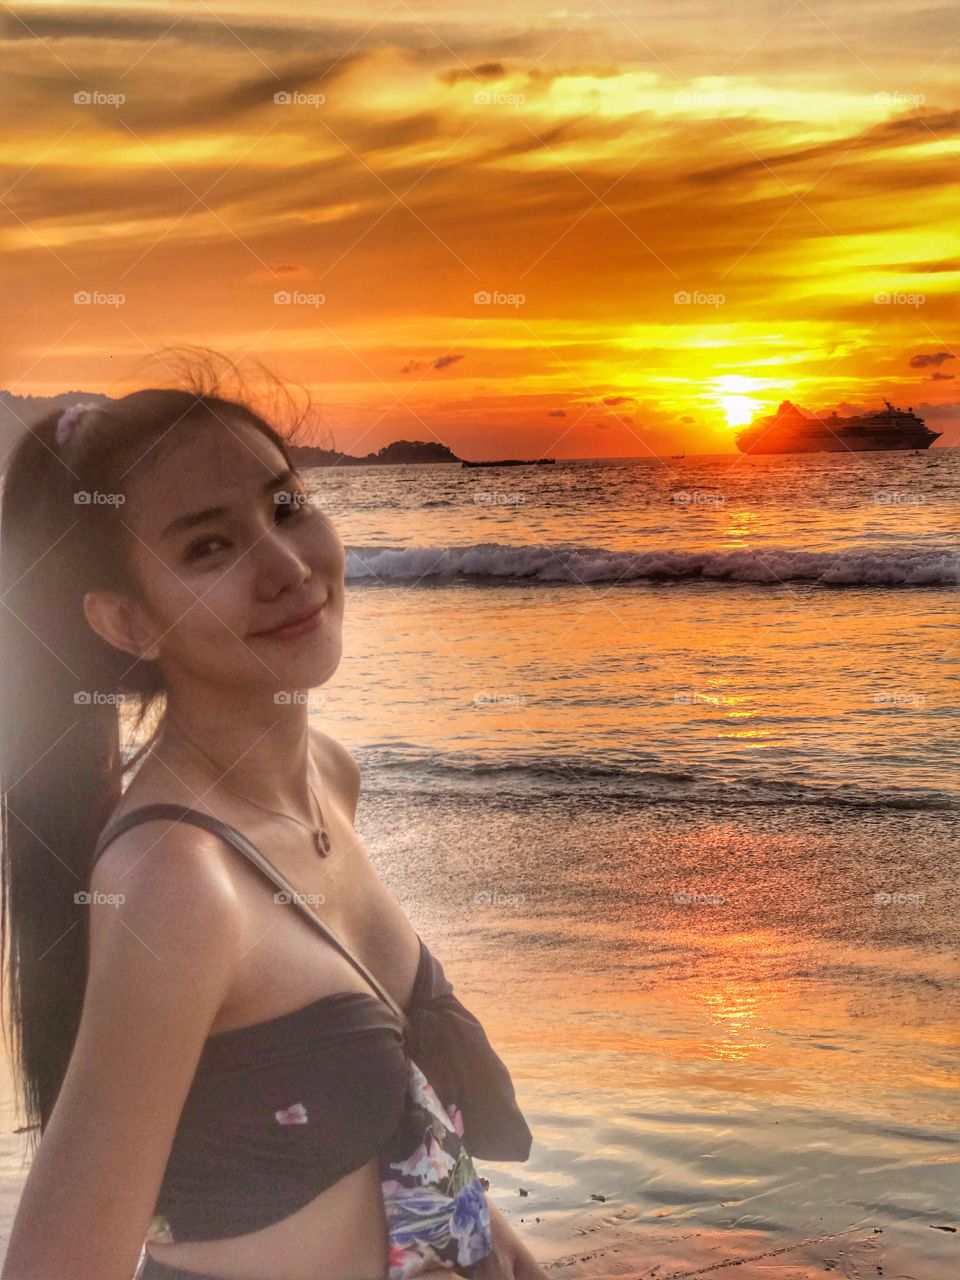 My lovely smile and Sunset at the phuket 